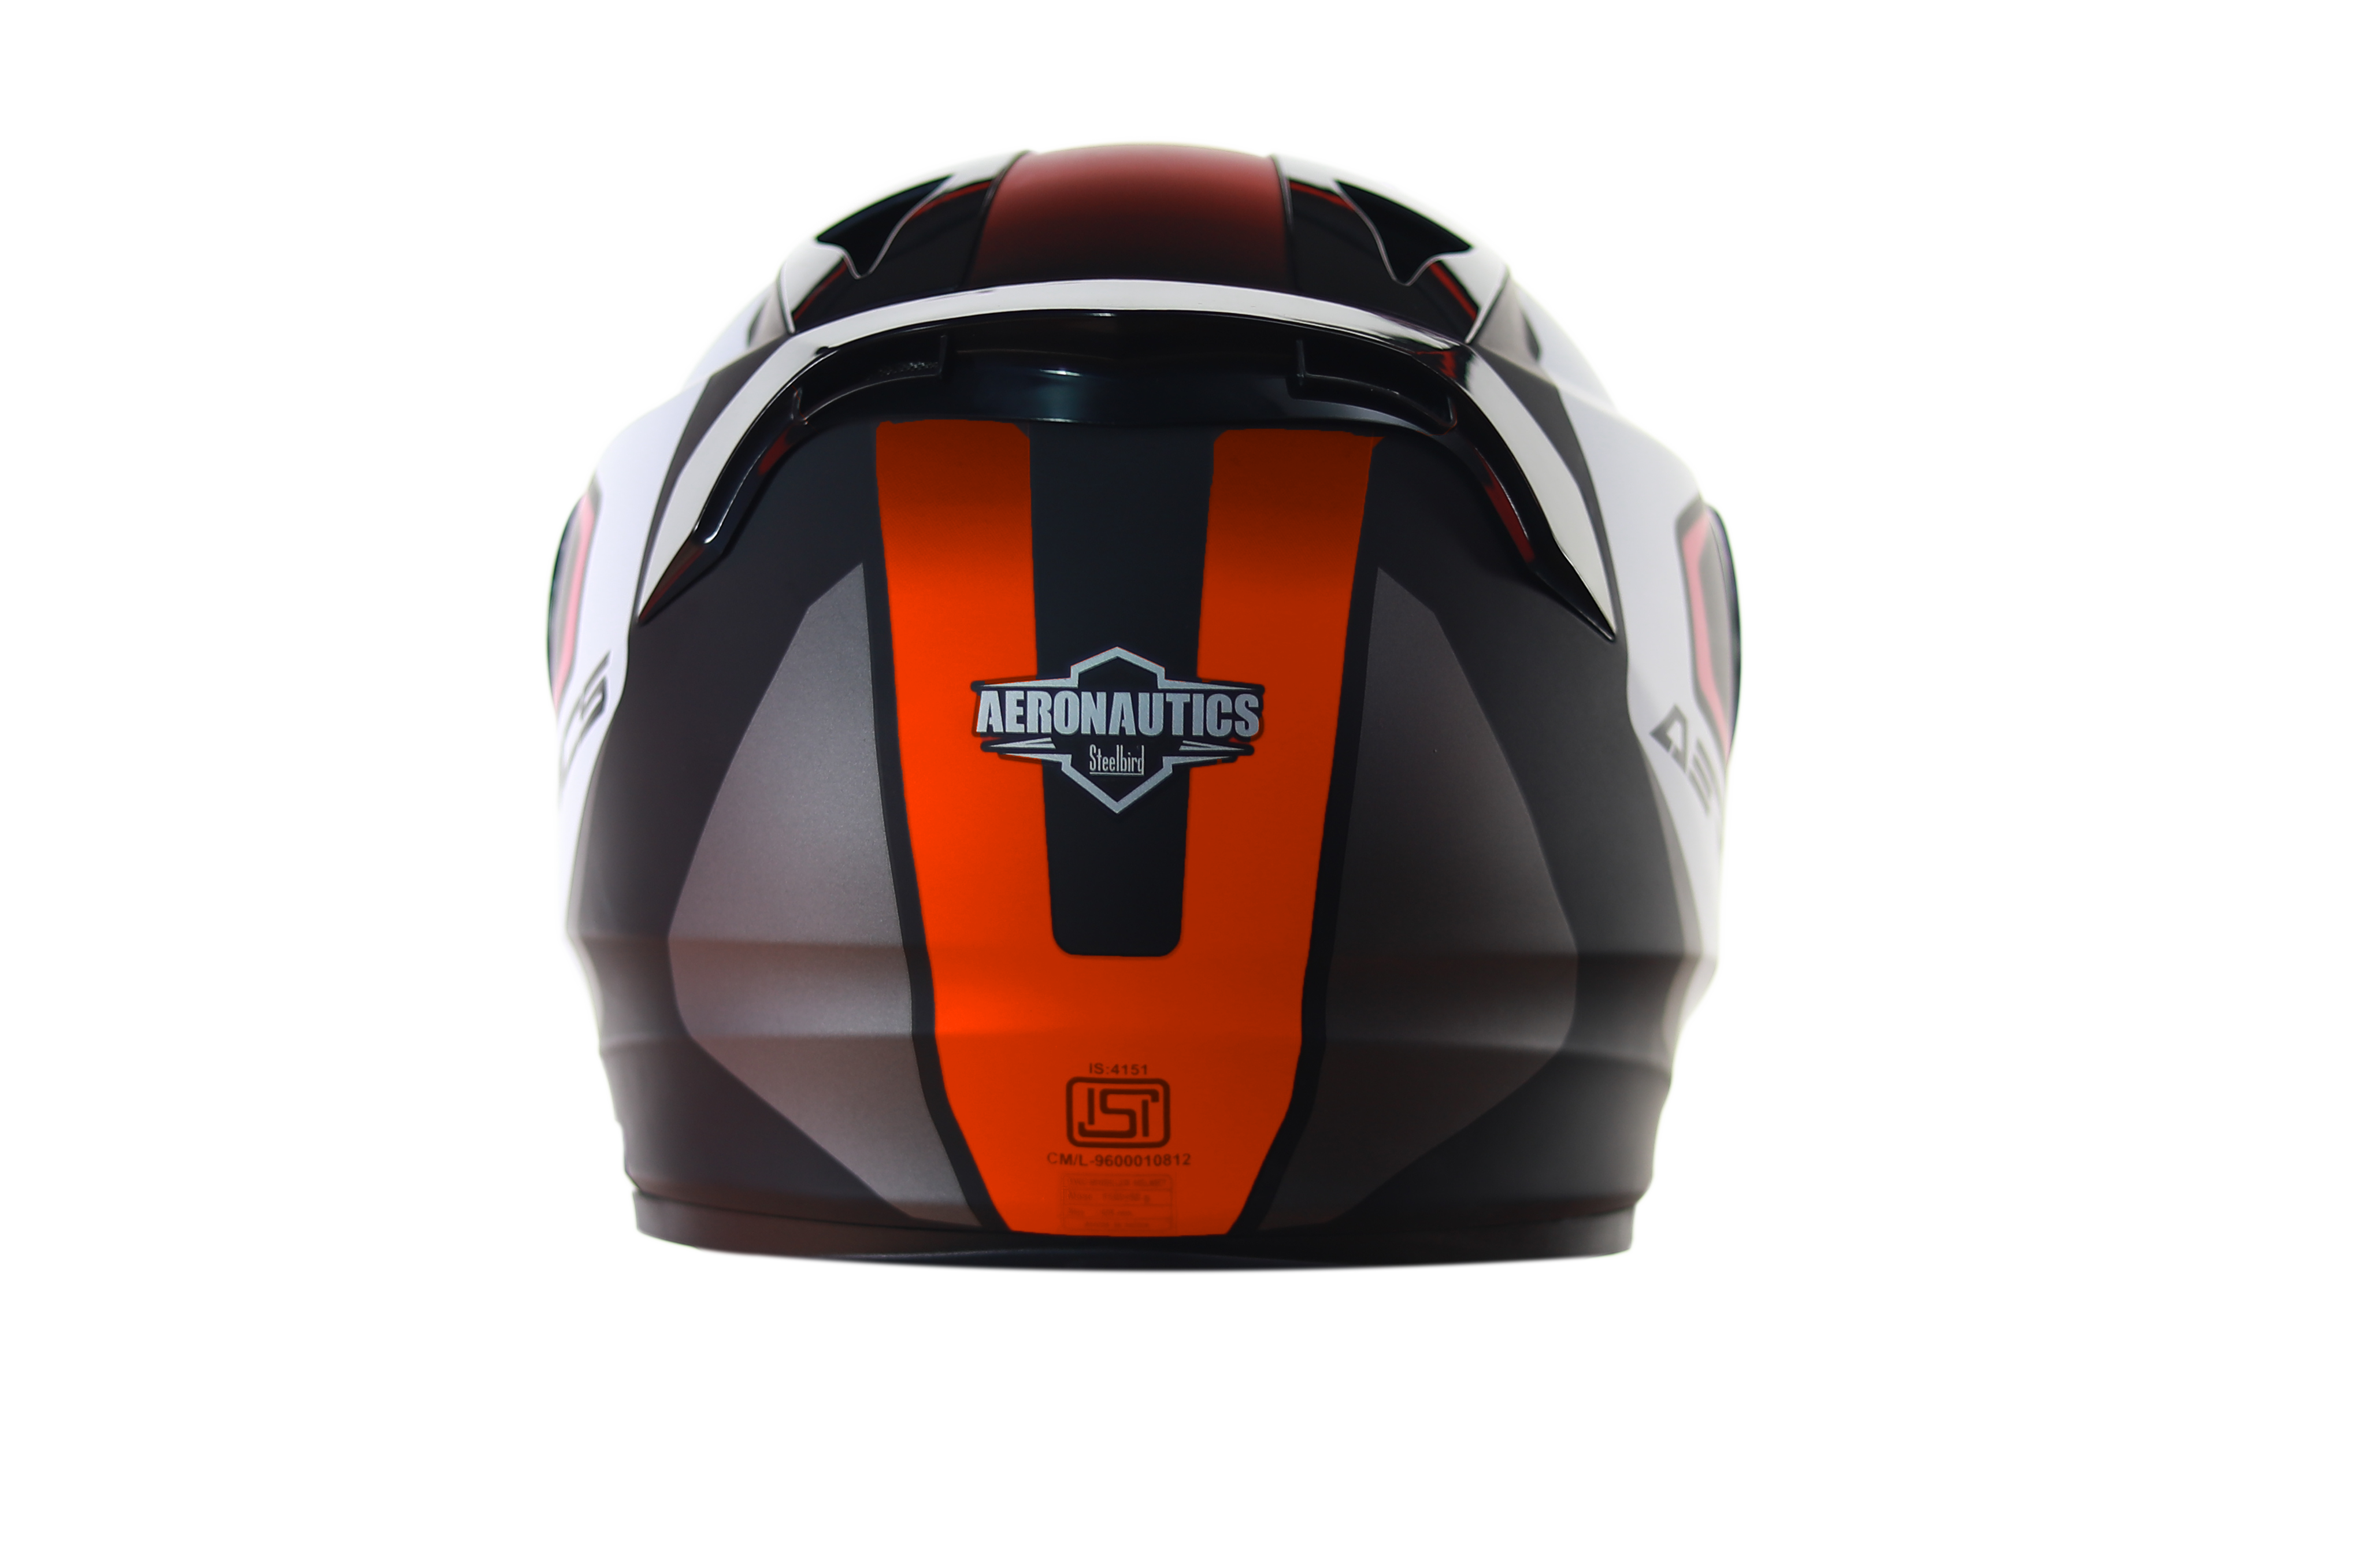 SA-1 Aerodynamics Mat Black With Orange(Fitted With Clear Visor Extra Silver Chrome Visor Free)